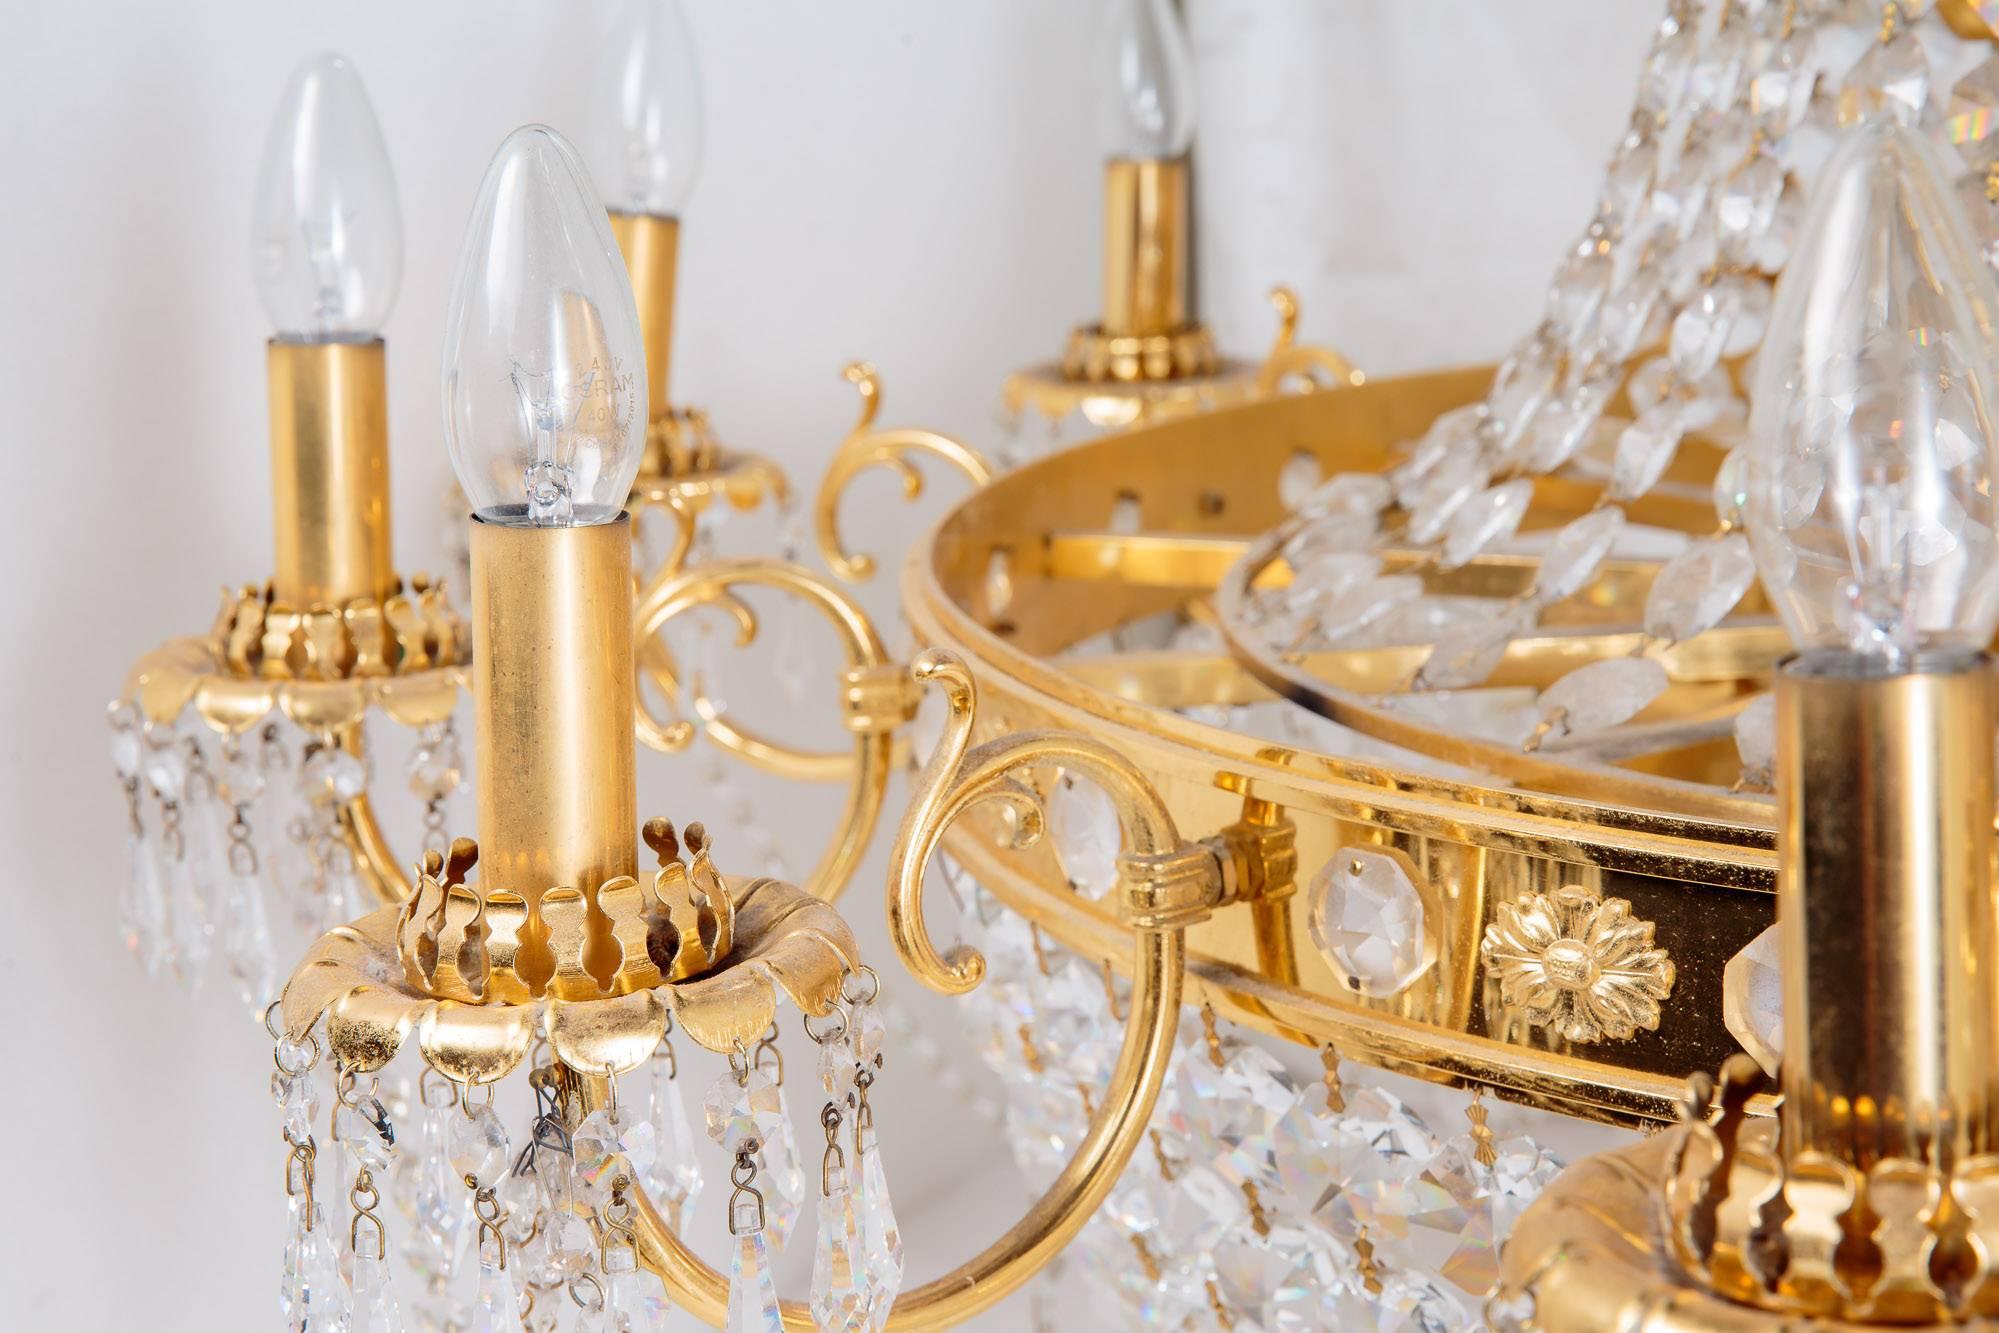 A set of 14 matching cut-glass and gilt bronze chandeliers with engraved storm shades, circa 1960 in the Regency manner. These exceptional chandeliers are all individually export crated. They arrived with us in Dorset, England just last week. We